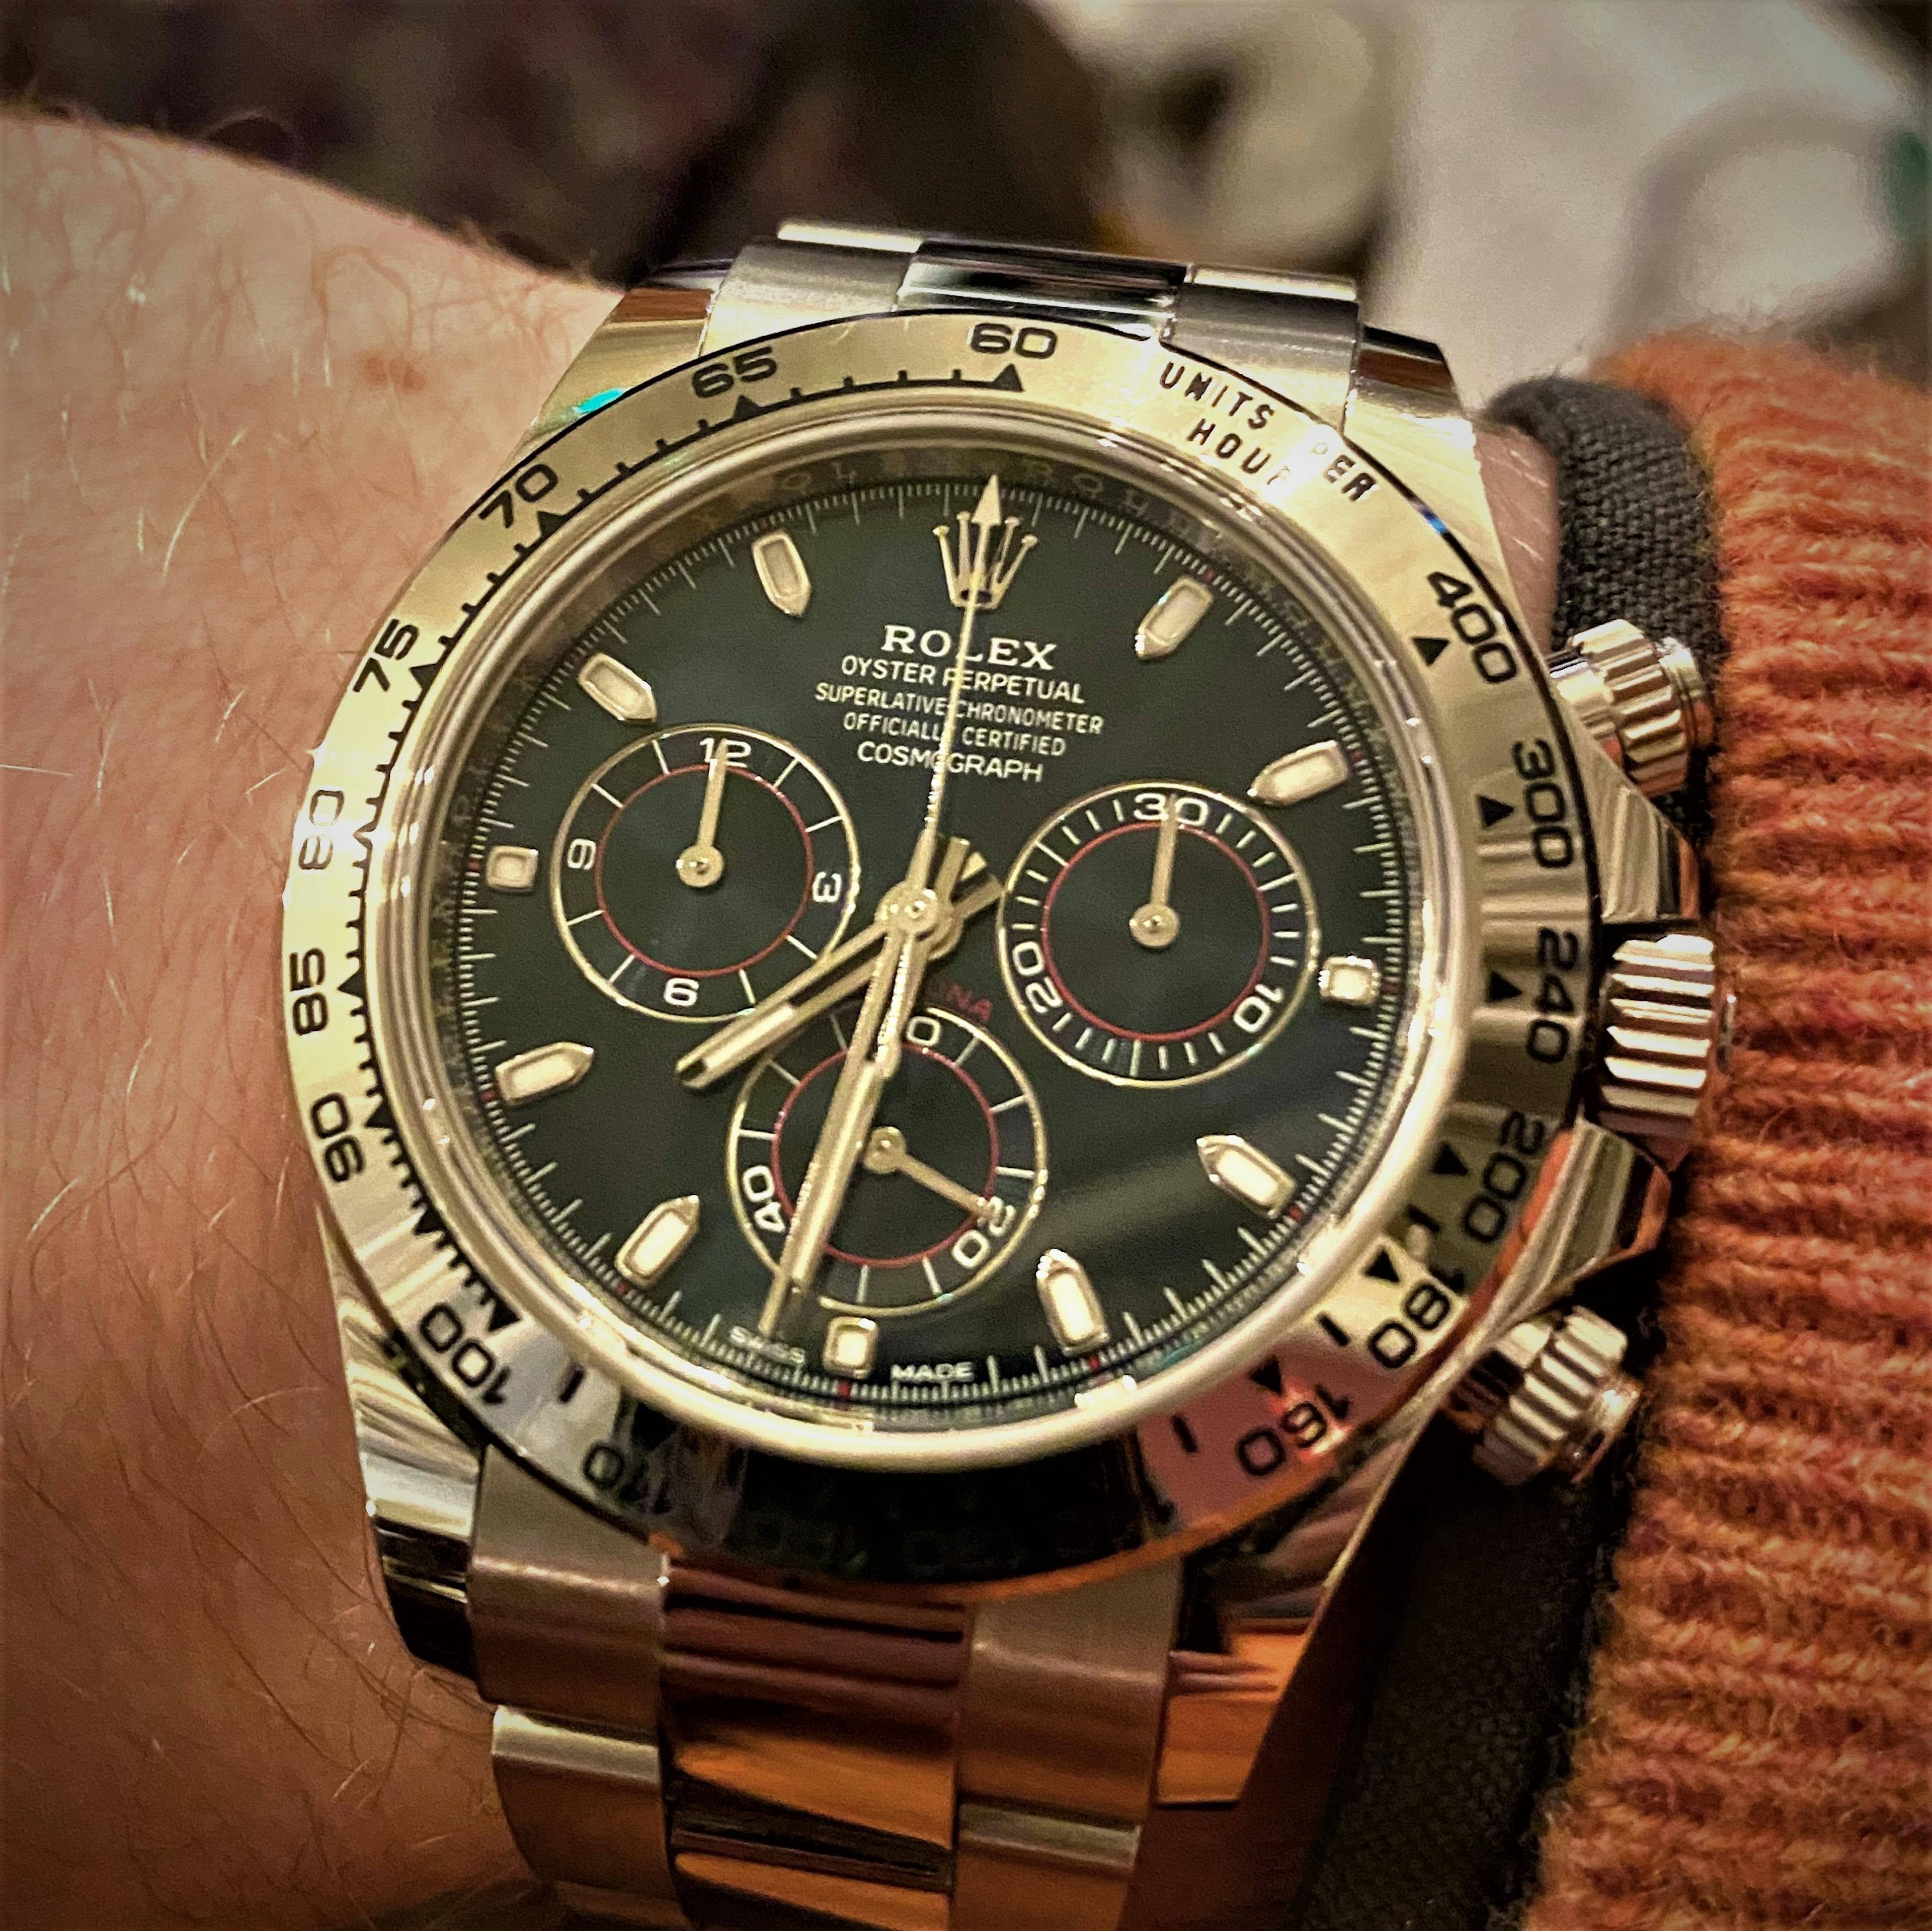 Rolex Daytona Chronograph - a watch with a Stopwatch tool